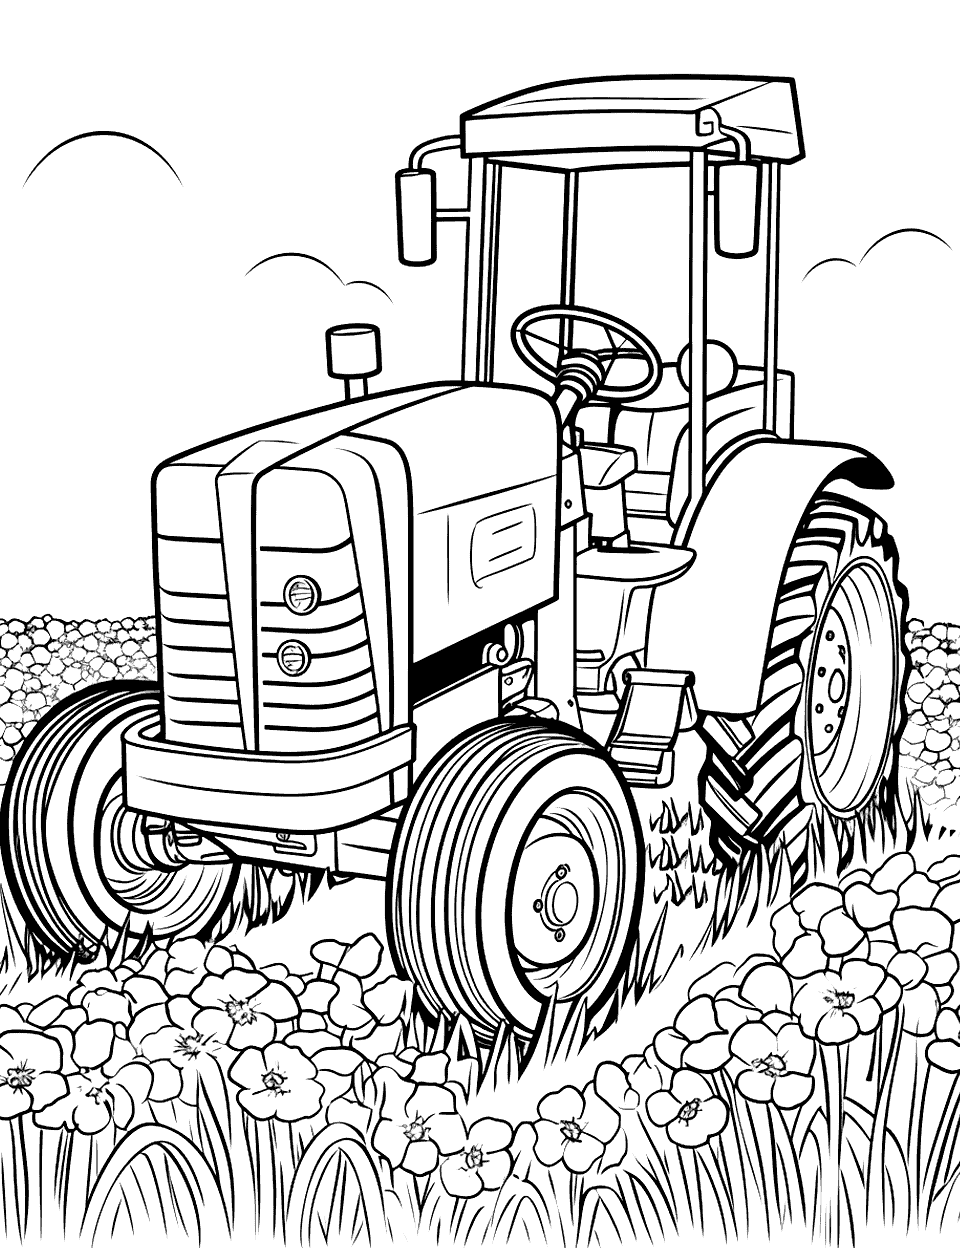 Springtime Tractor and Tulips Coloring Page - A tractor amidst a field of tulips in full bloom.